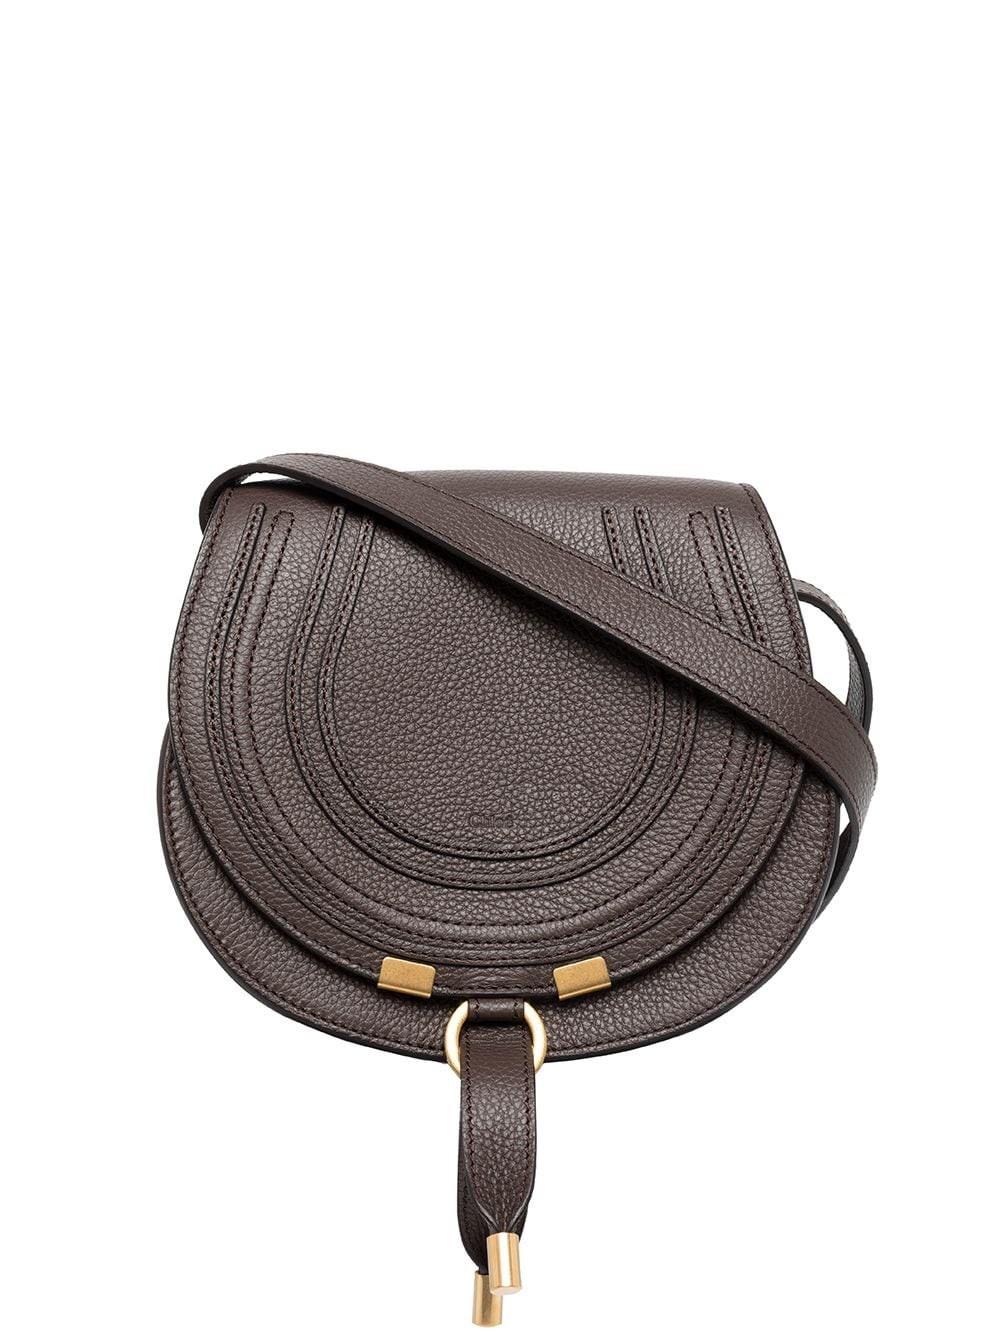 Chloé Small Marcie Saddle Bag in Brown | Lyst